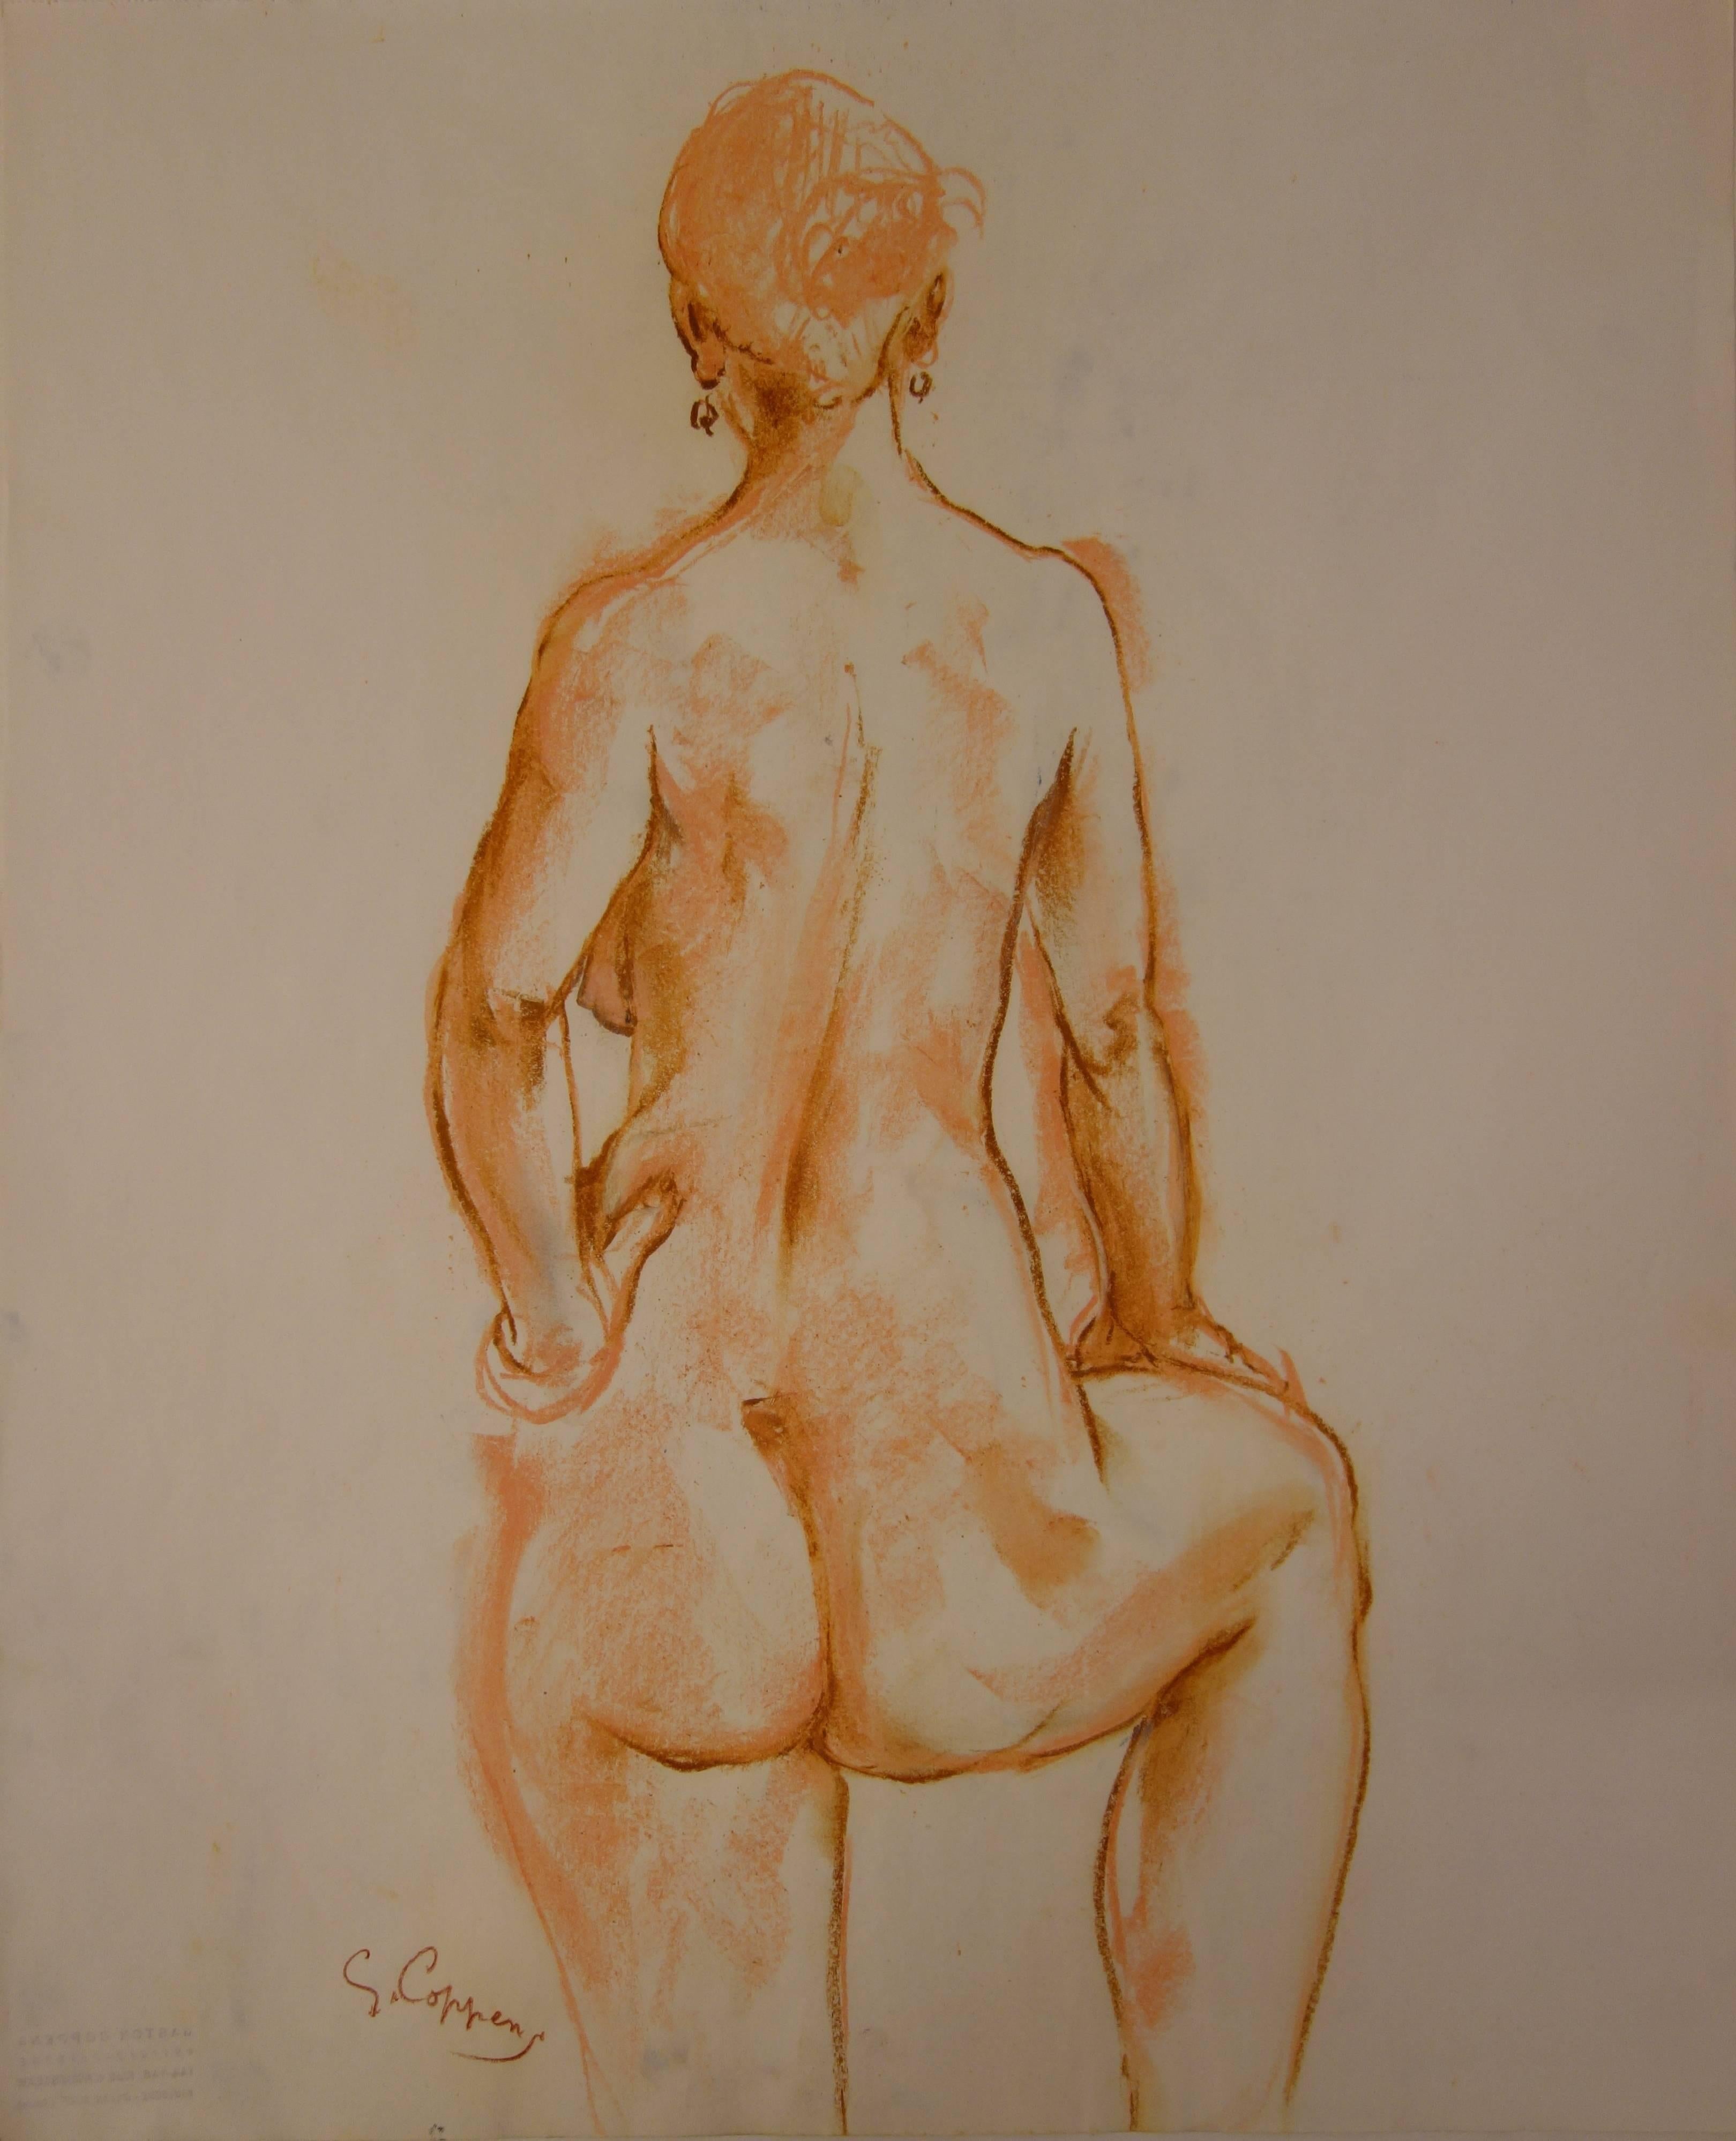 Study for a Standing Nude Sculpture - Original signed charcoals drawing - Art by Gaston Coppens